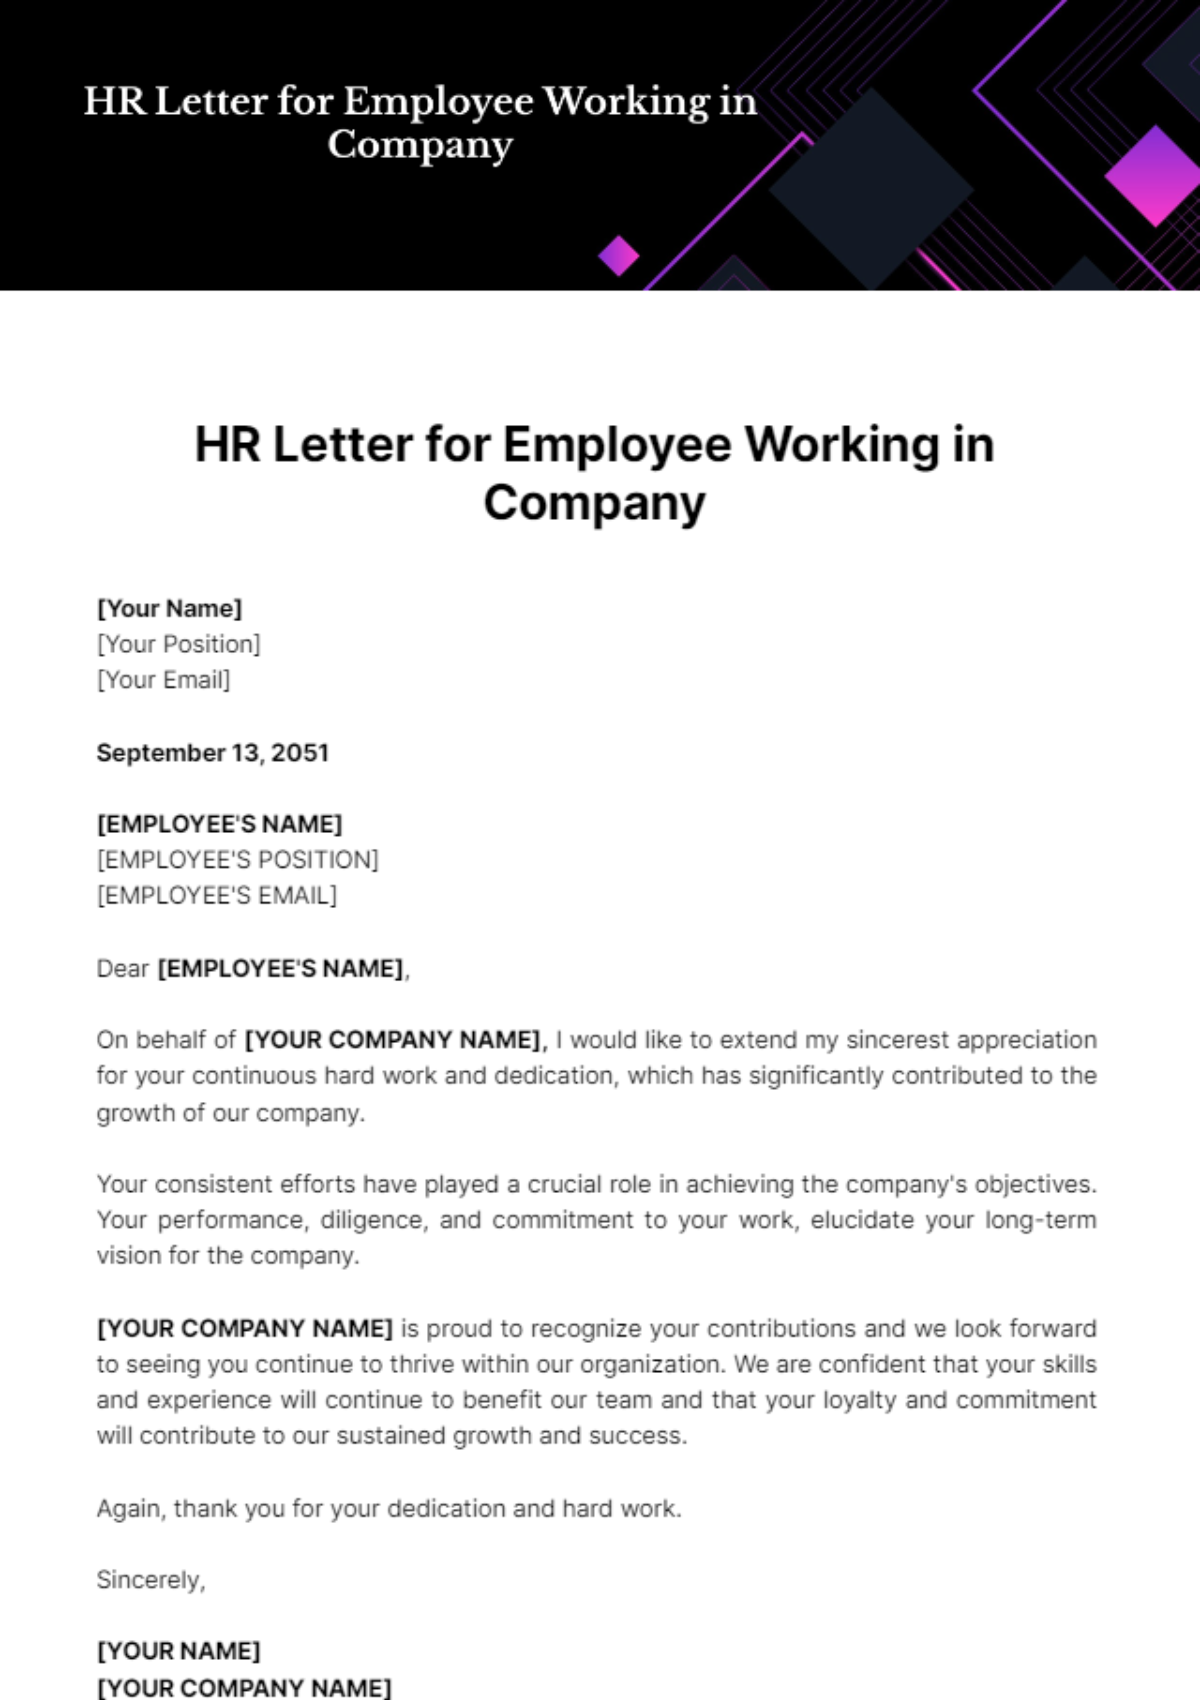 HR Letter for Employee Working in Company Template